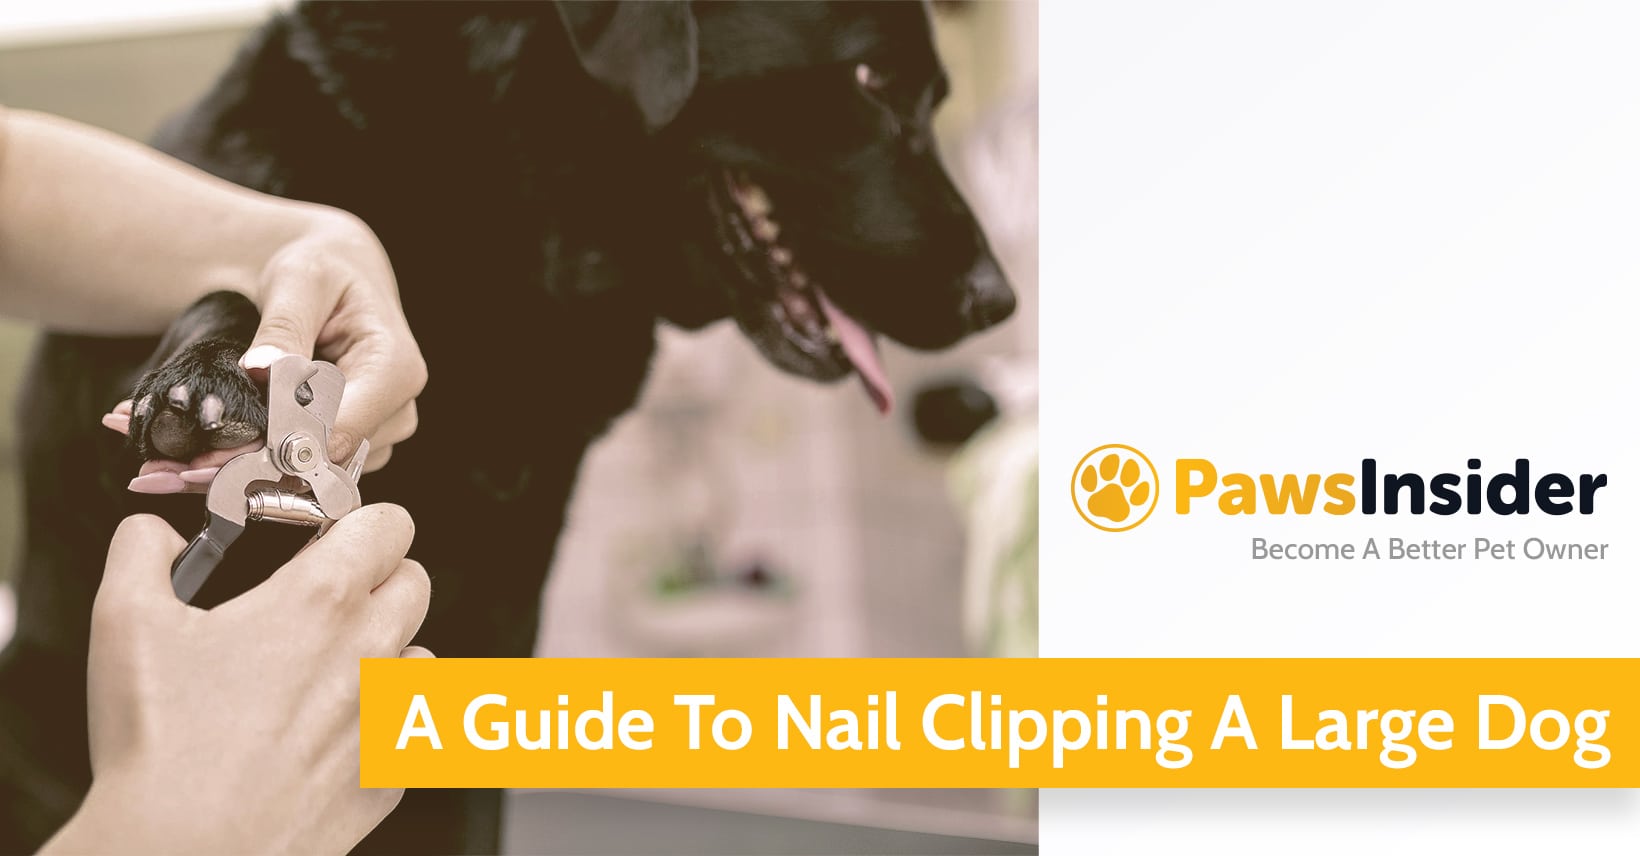 A Guide To Nail Clipping A Large Dog // Paws Insider